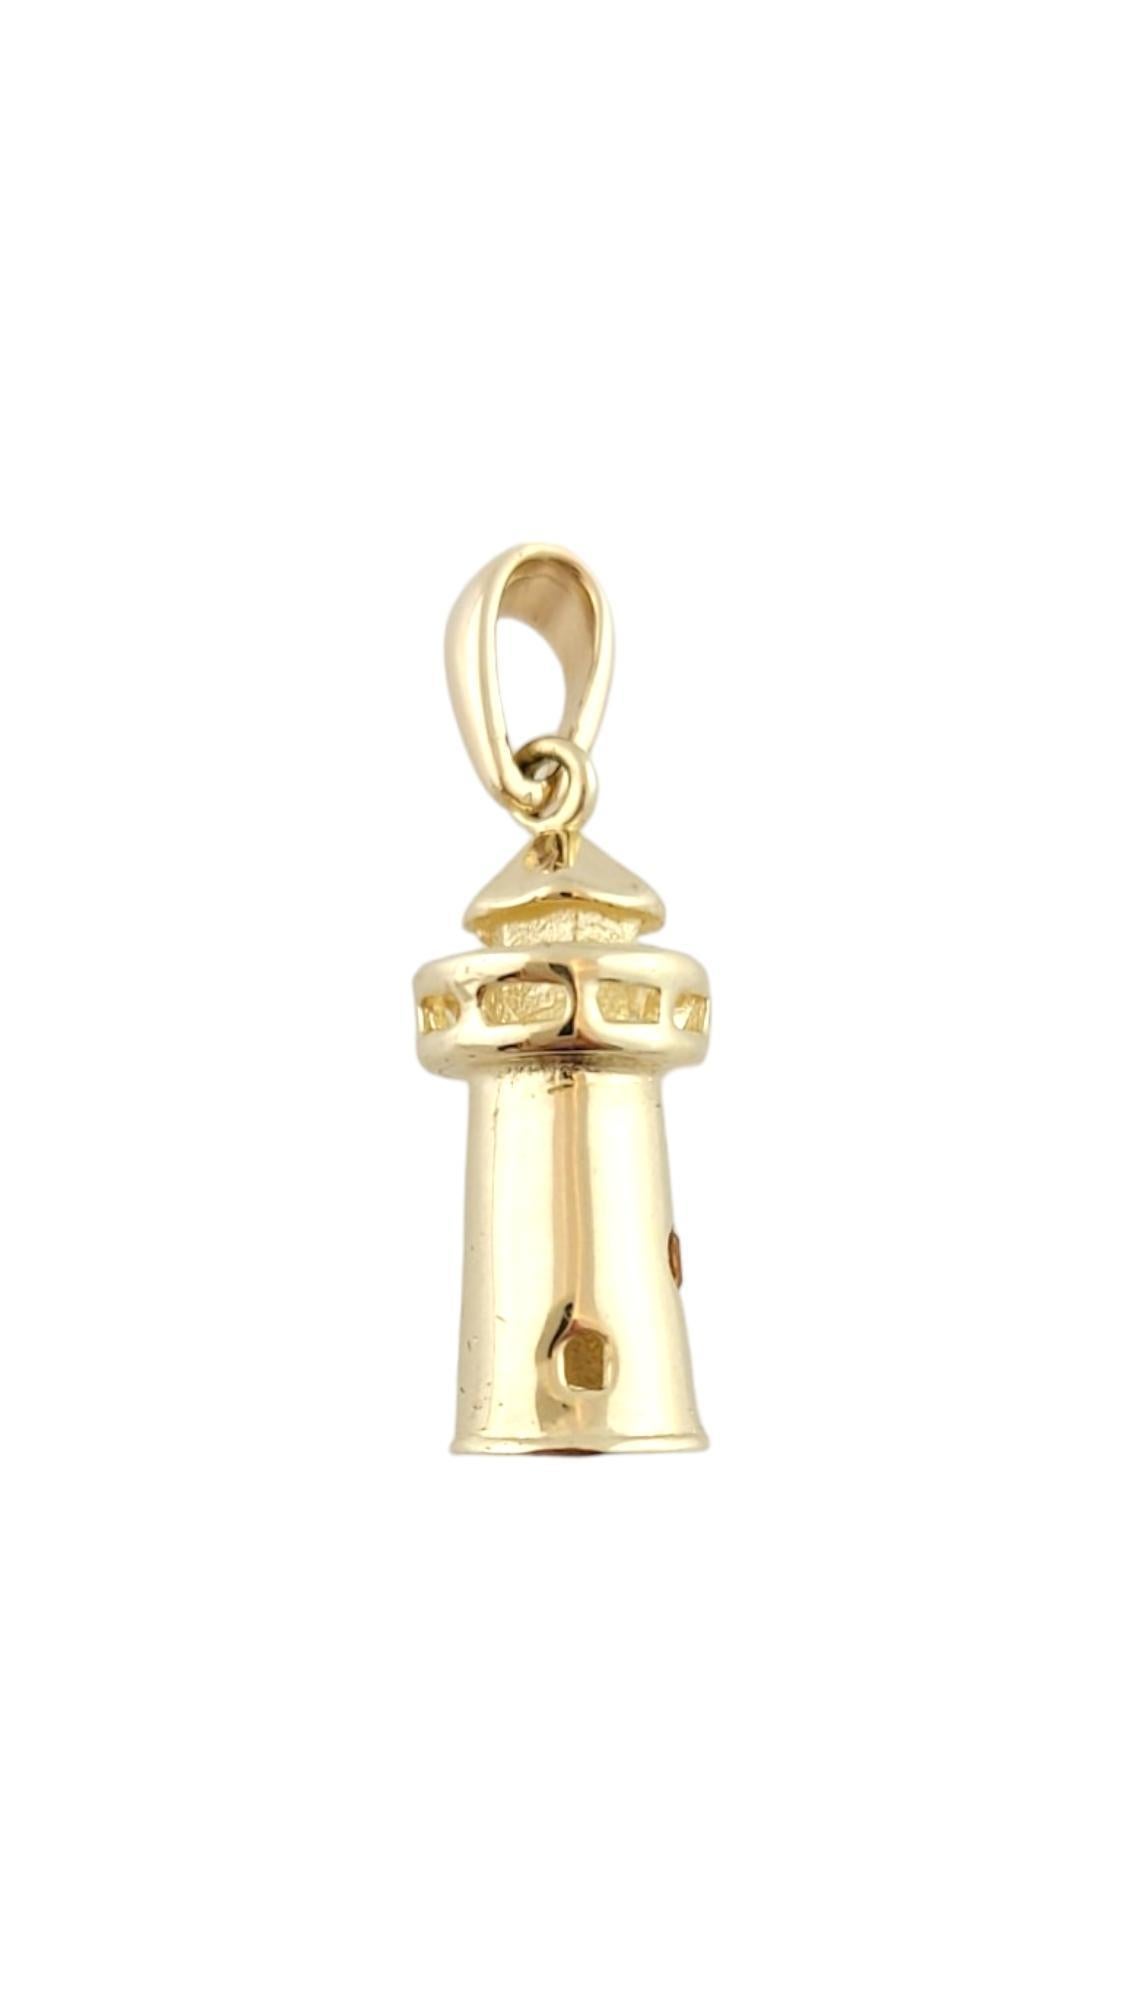 Vintage 14K Yellow Gold Lighthouse Charm 

Lighthouse charm in yellow gold with windows.

Weight: 3.9 g/ 2.5 dwt.

Measurements: 20.85 mm X 8.27 mm

Length with bale: 27.27 mm

Very good condition, professionally polished.

Will come packaged in a